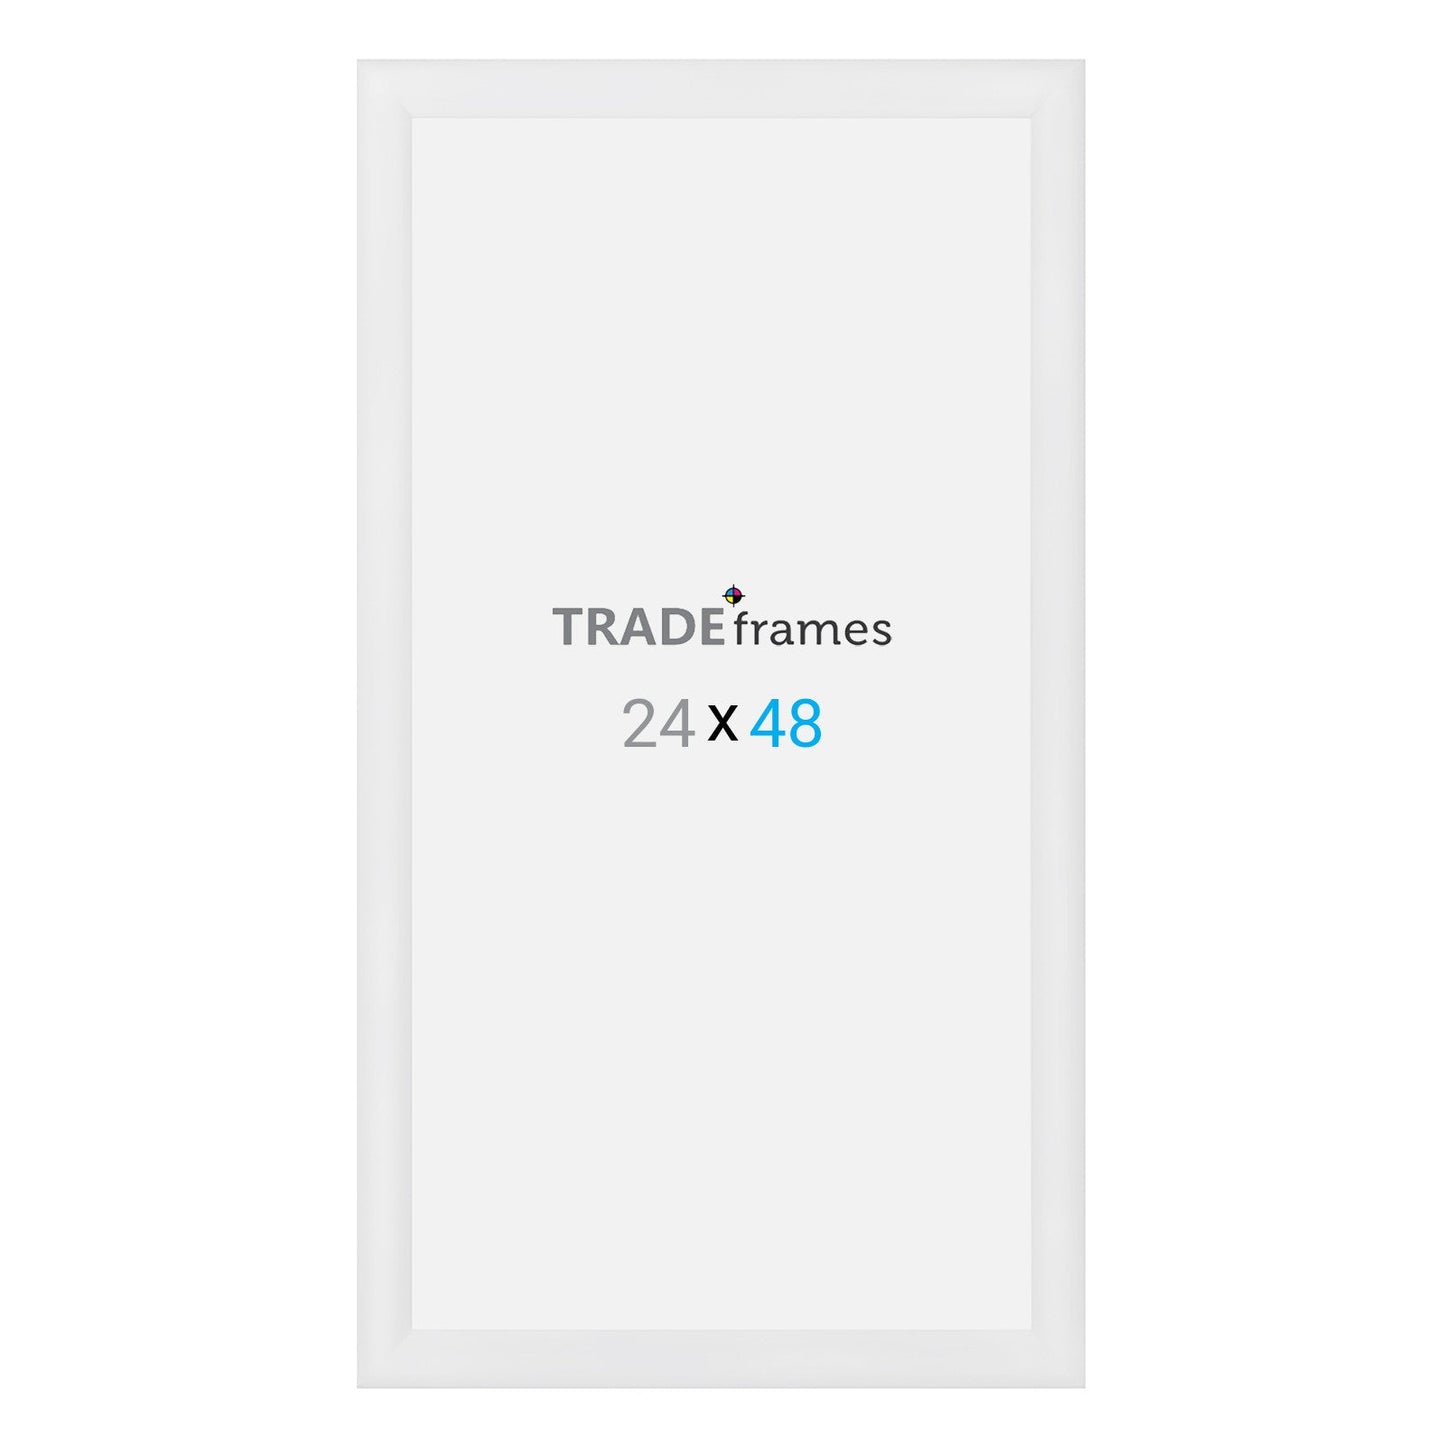 24x48 TRADEframe White Snap Frame 24x48 - 1.2 inch profile - Snap Frames Direct